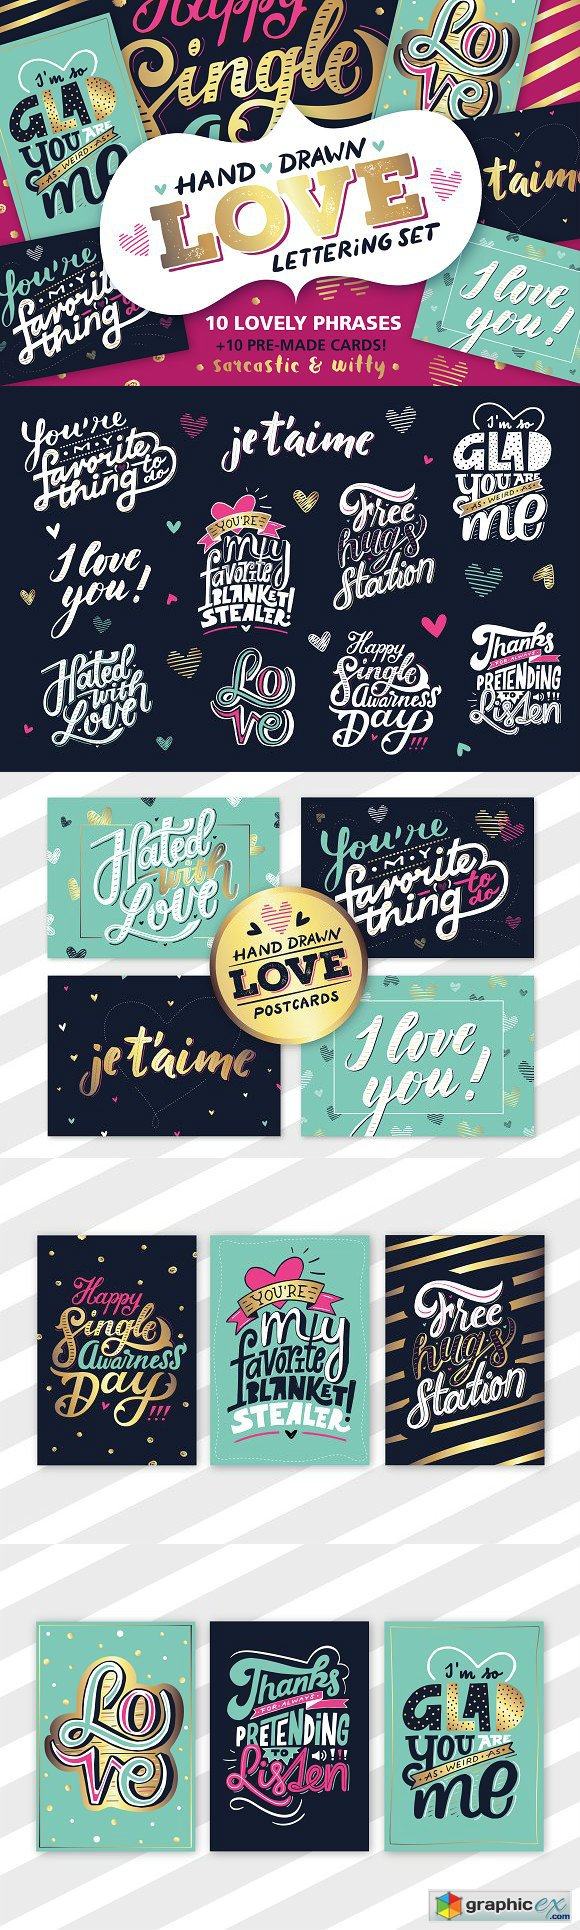 Love lettering Valentines Cards